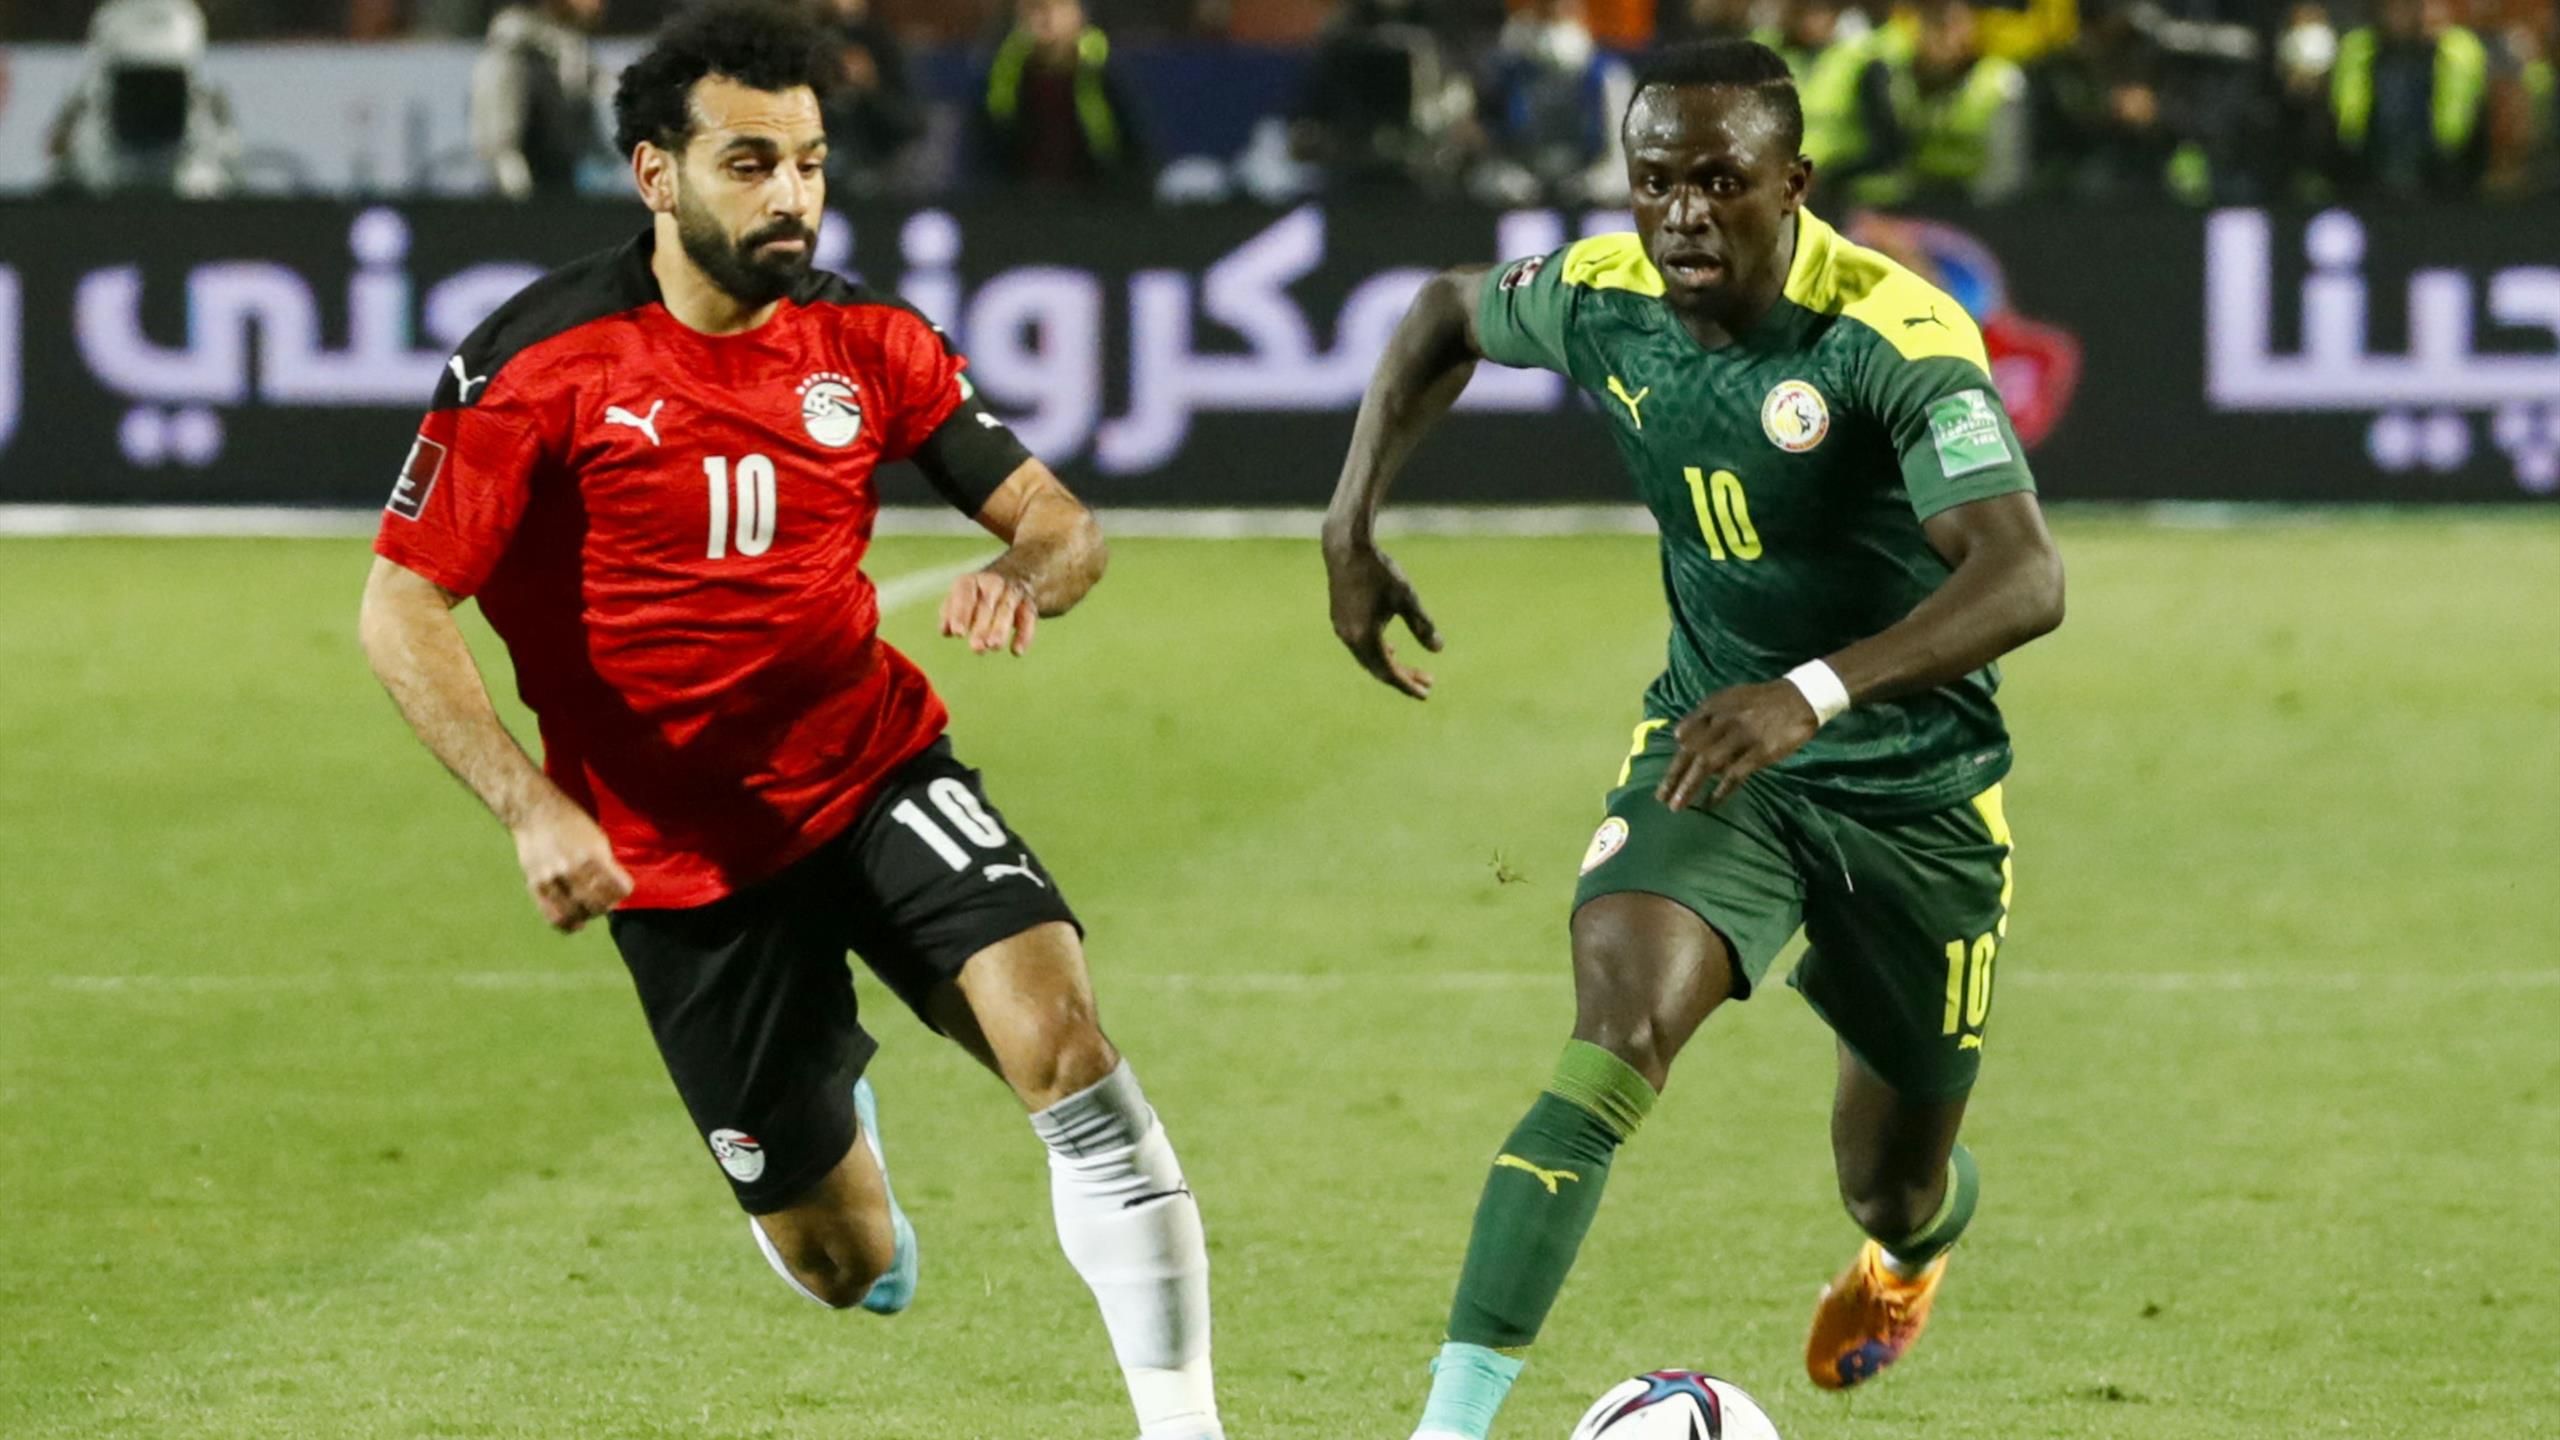 Mohammed Salah of Egypt and Sadio Mane of Egypt chase the ball in the AFCON 2021 final in Cameroon